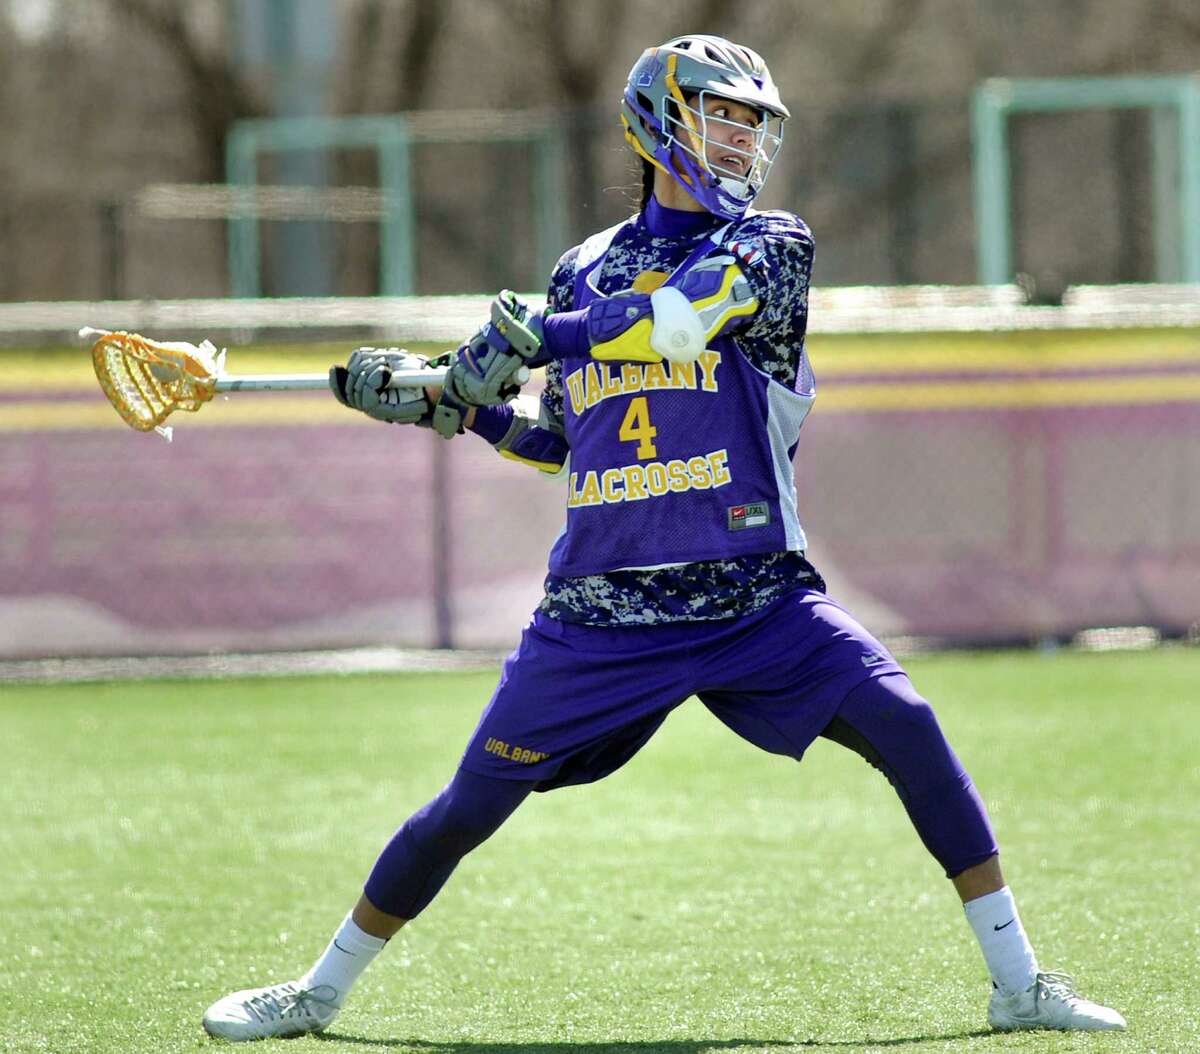 UAlbany's Lyle Thompson takes a shot during lacrosse practice on Wednesday, April 1, 2015, at UAlbany in Albany, N.Y. (Cindy Schultz / Times Union)